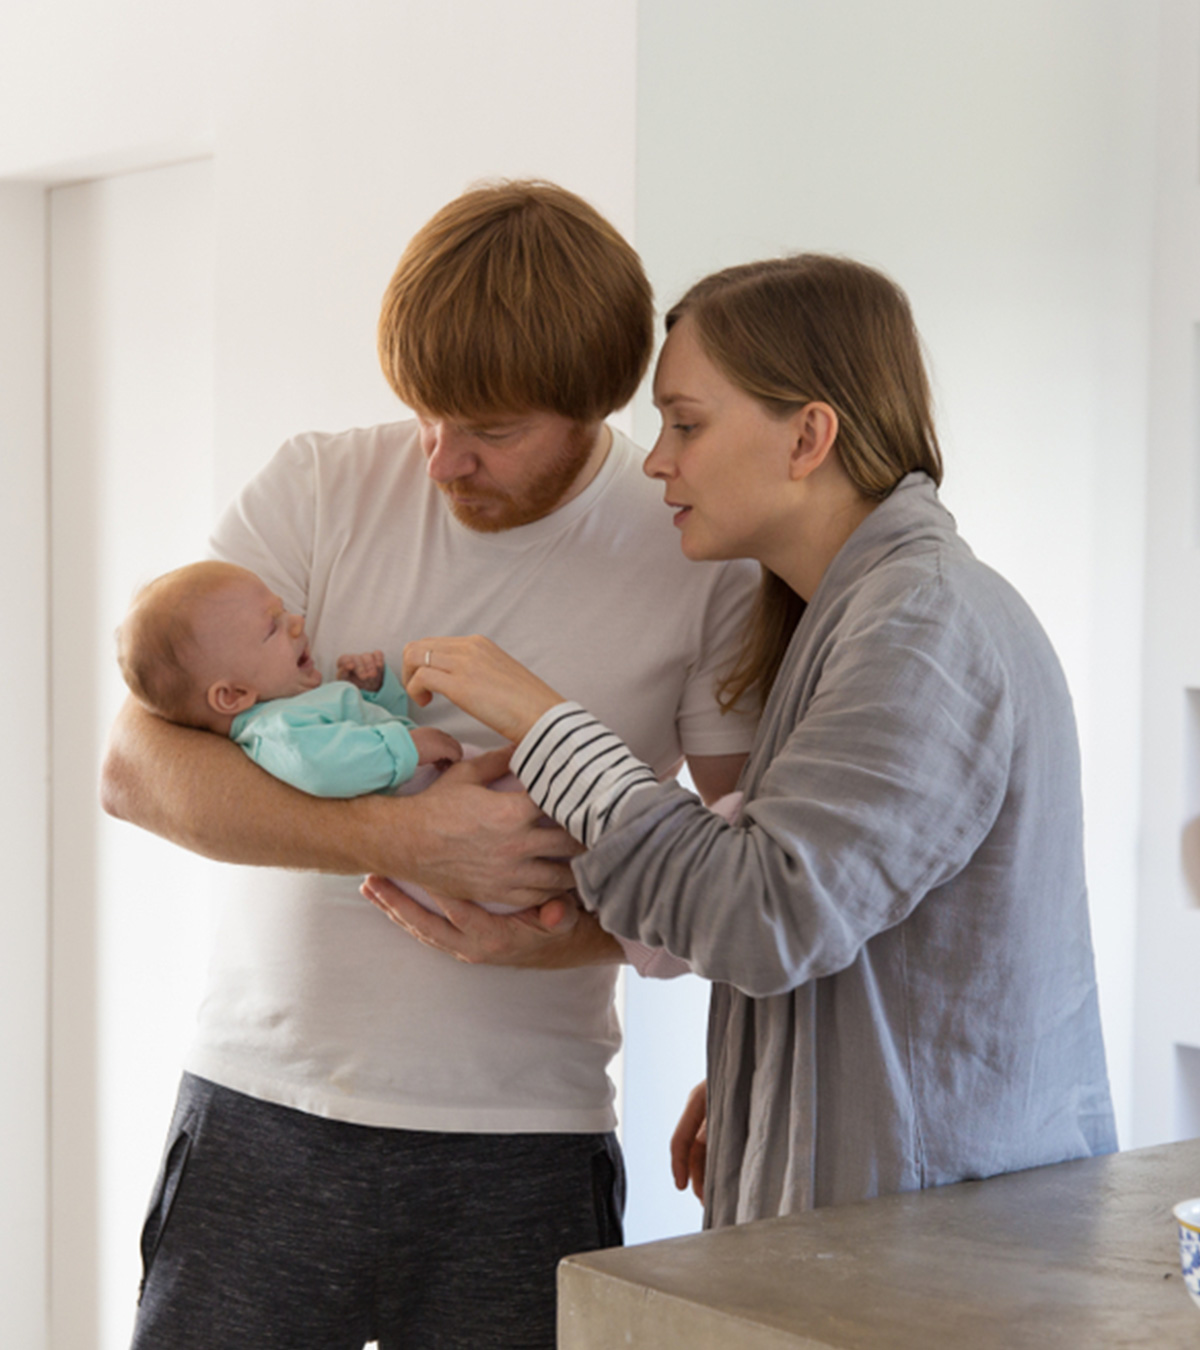 9 Ways To Survive Life With A Newborn And No Family Support